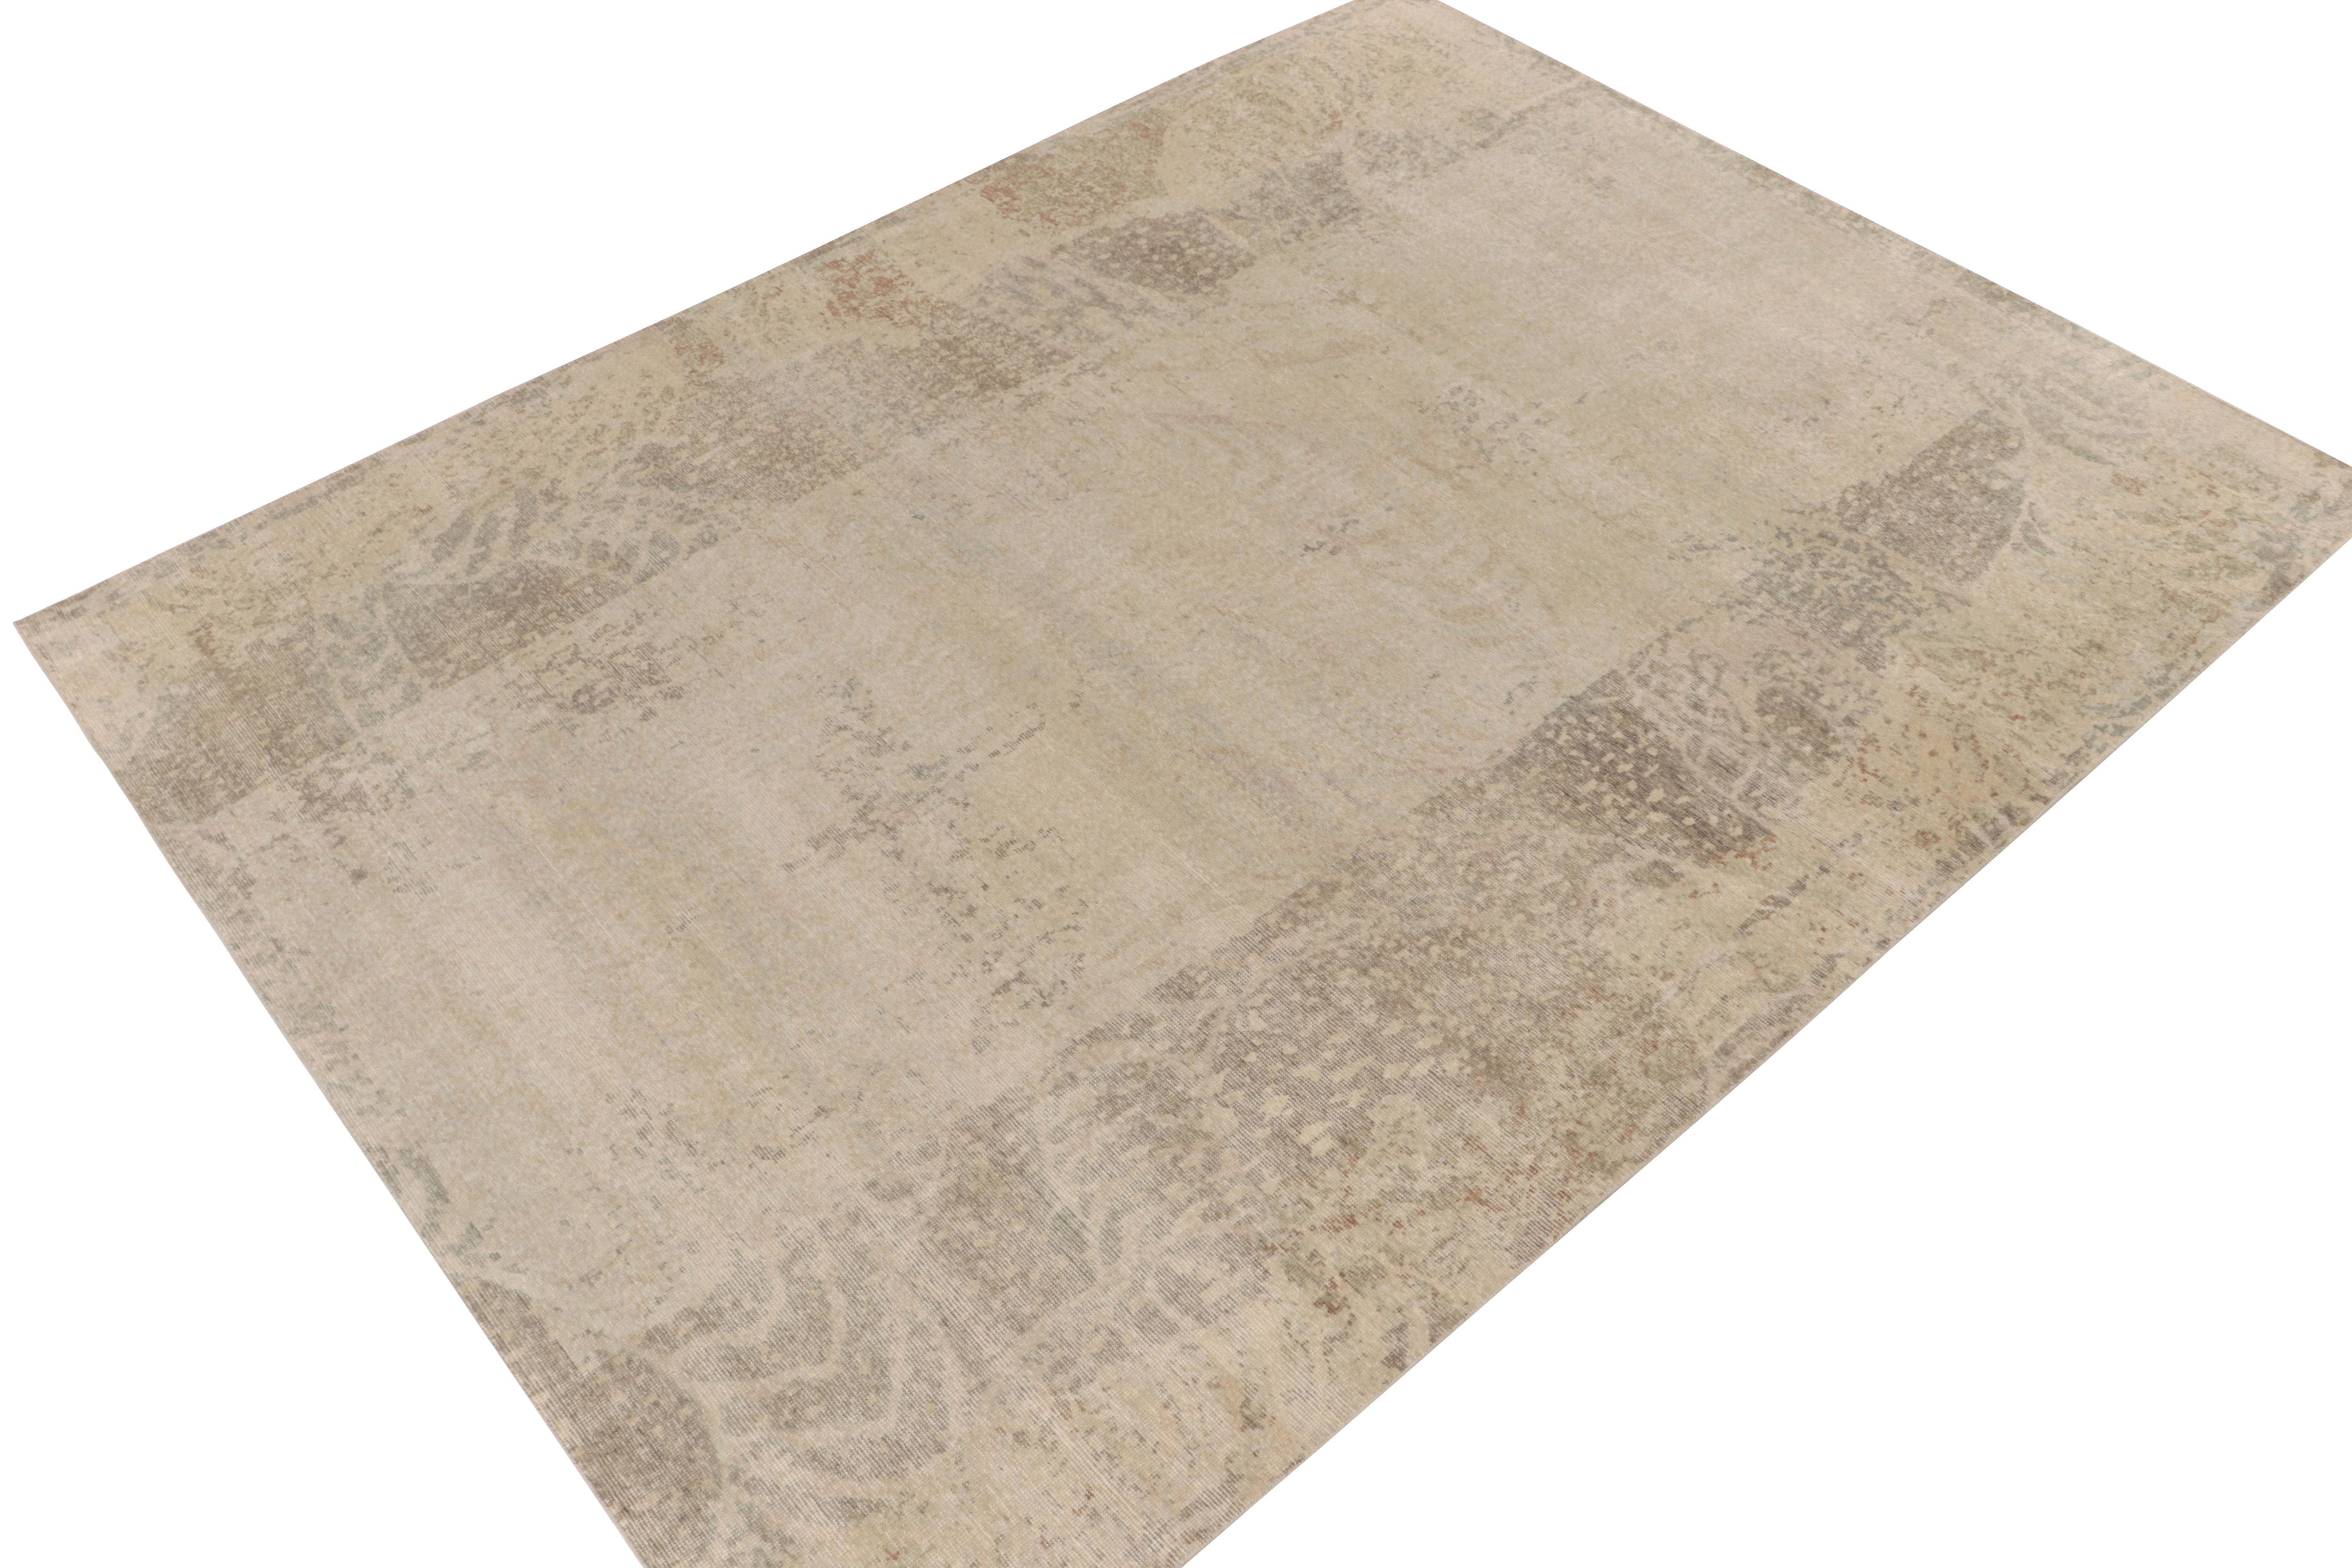 From Rug & Kilim’s Homage collection, a 9x12 distressed style abstract rug relishing a forgiving play of beige-brown and gray for a comfortable allure. Inspired by abstraction of animal skin rugs, the vision enjoys subtlety of color playing